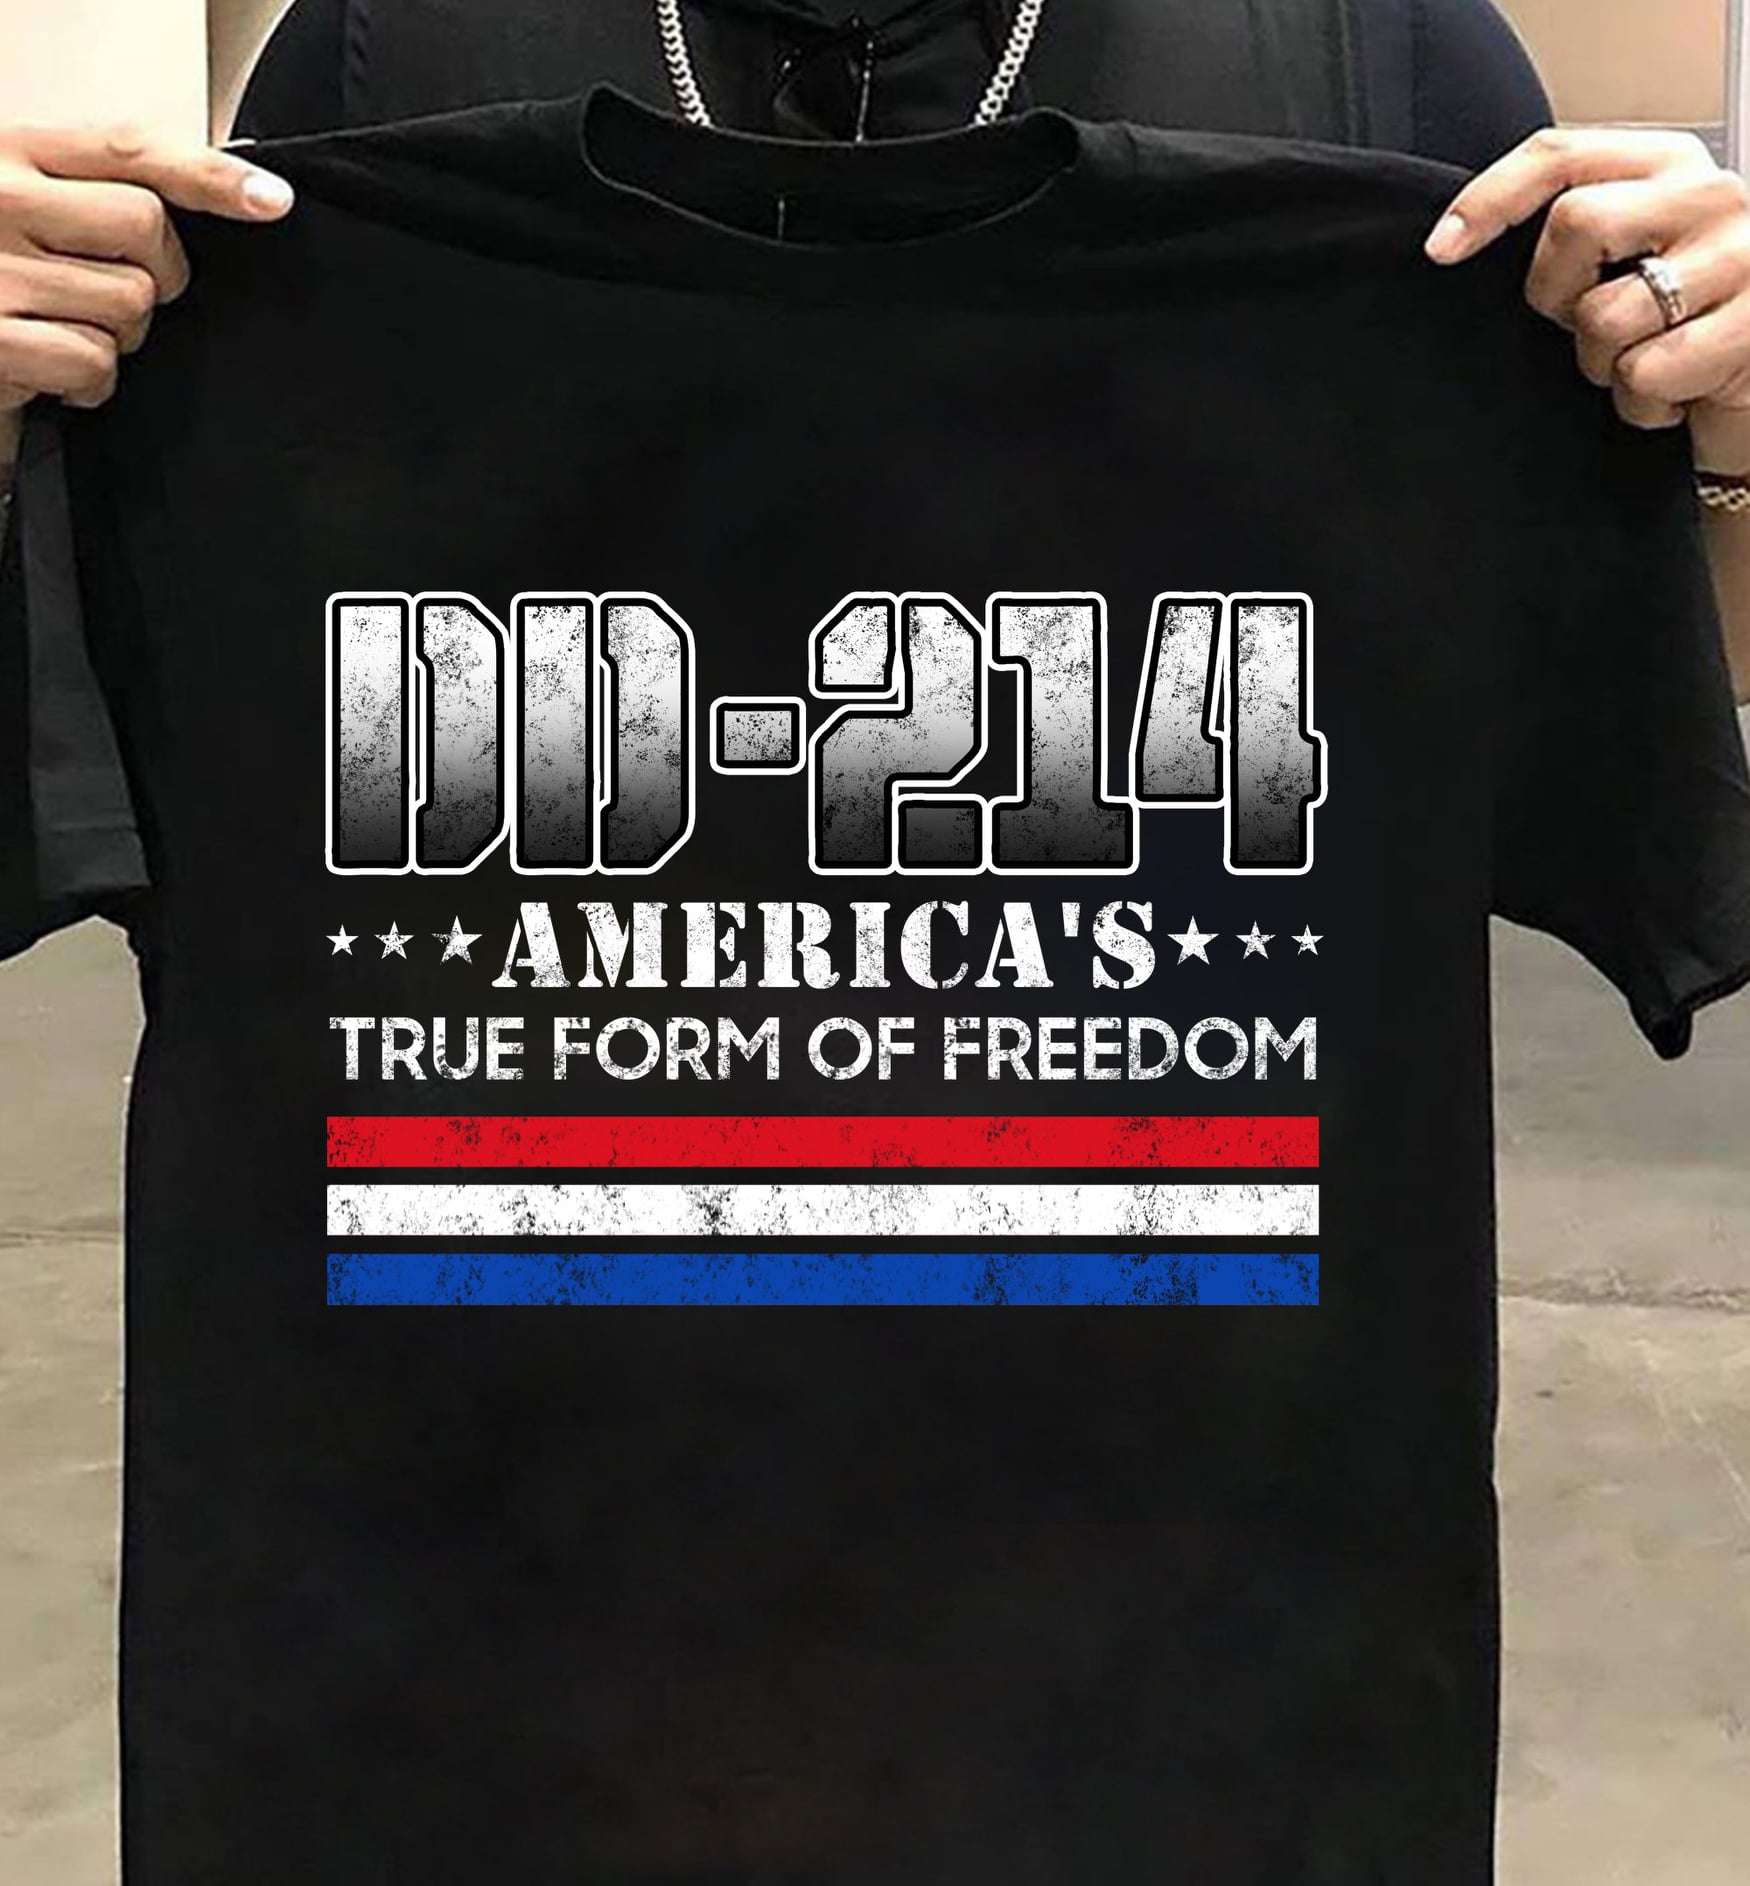 DD214 america's true form of freedom - American Independence Day